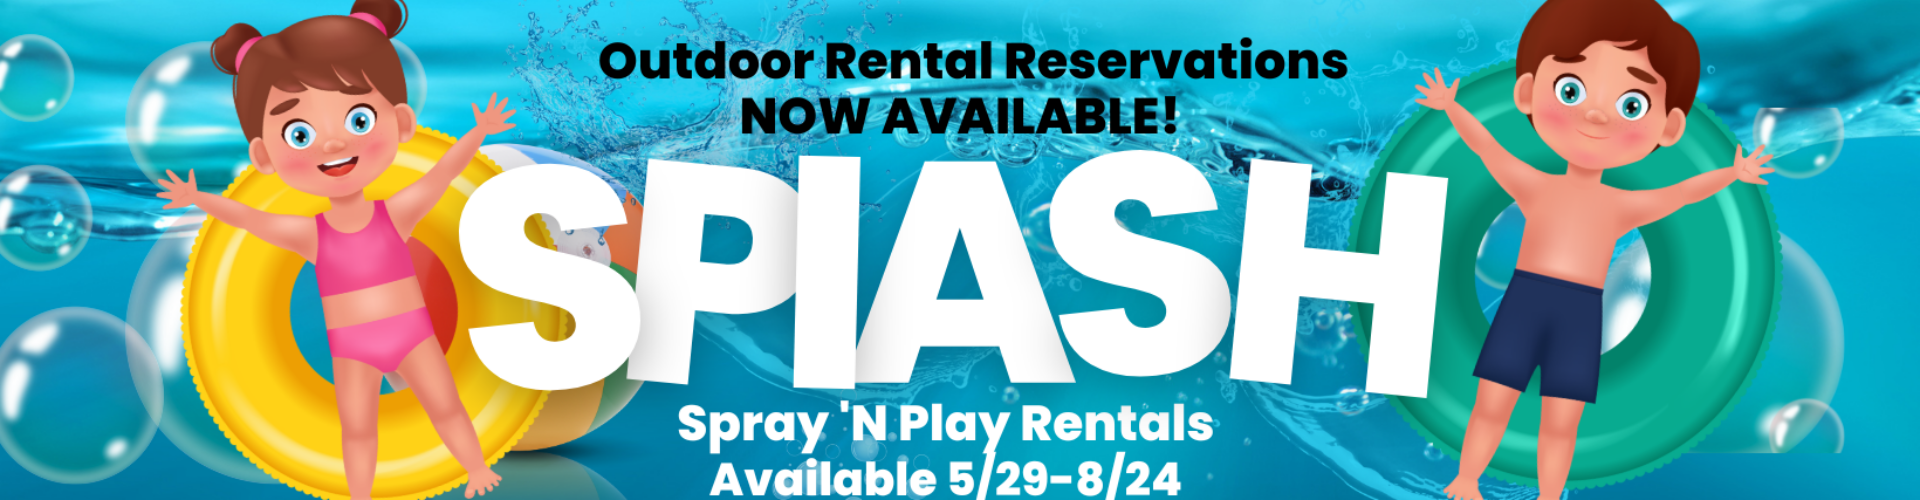 Advertisement for outdoor rental reservations with the word 